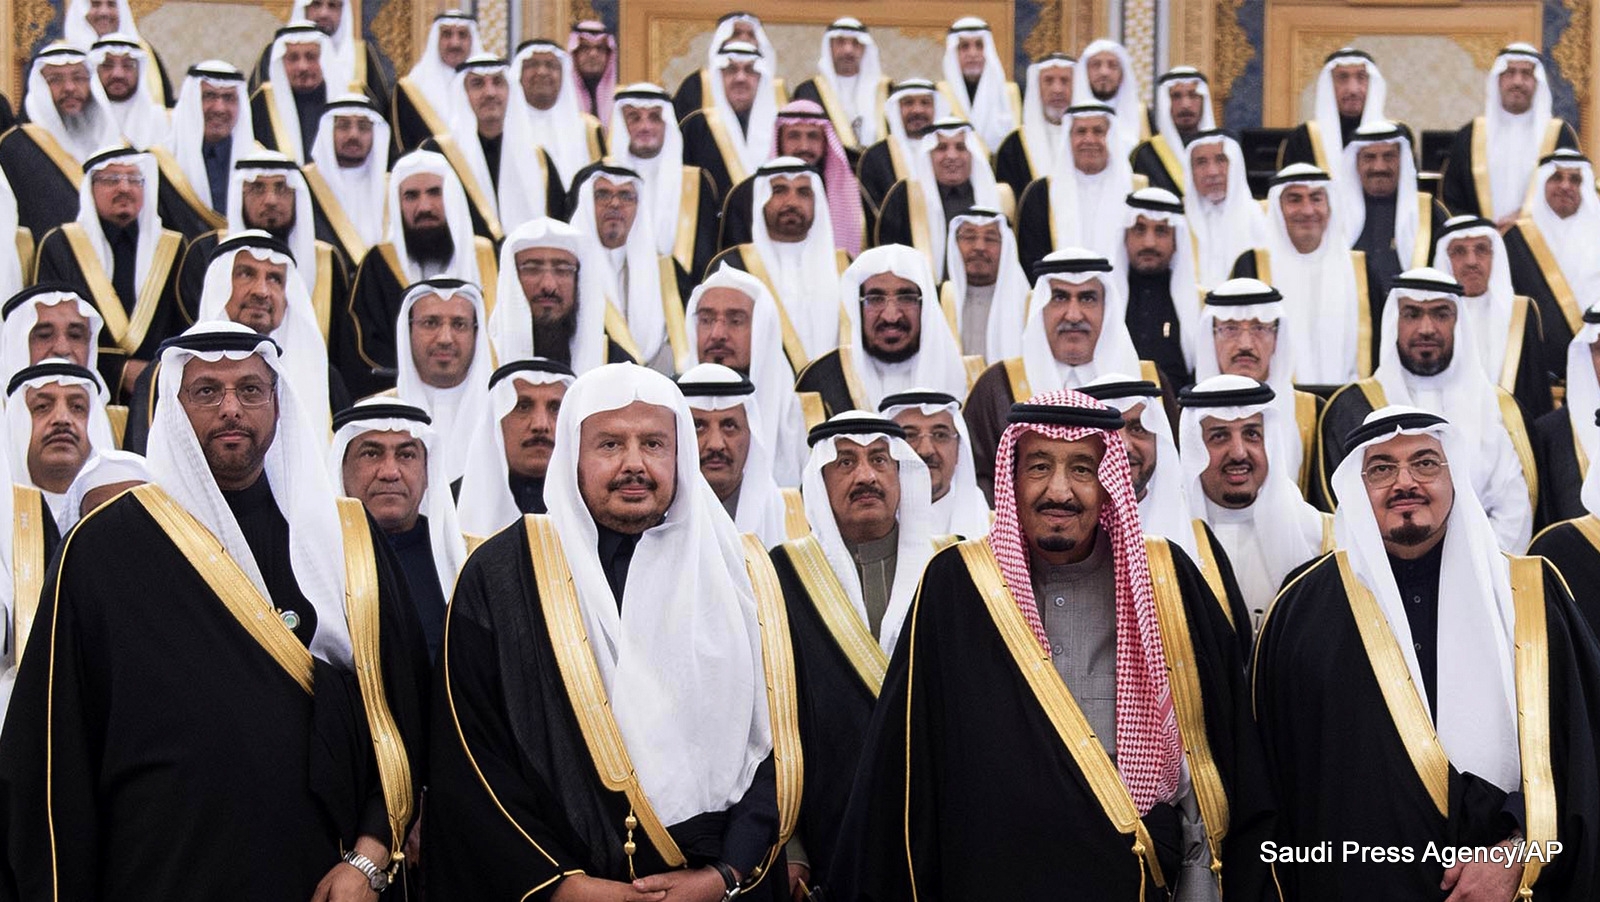 A picture of the saudi royal family